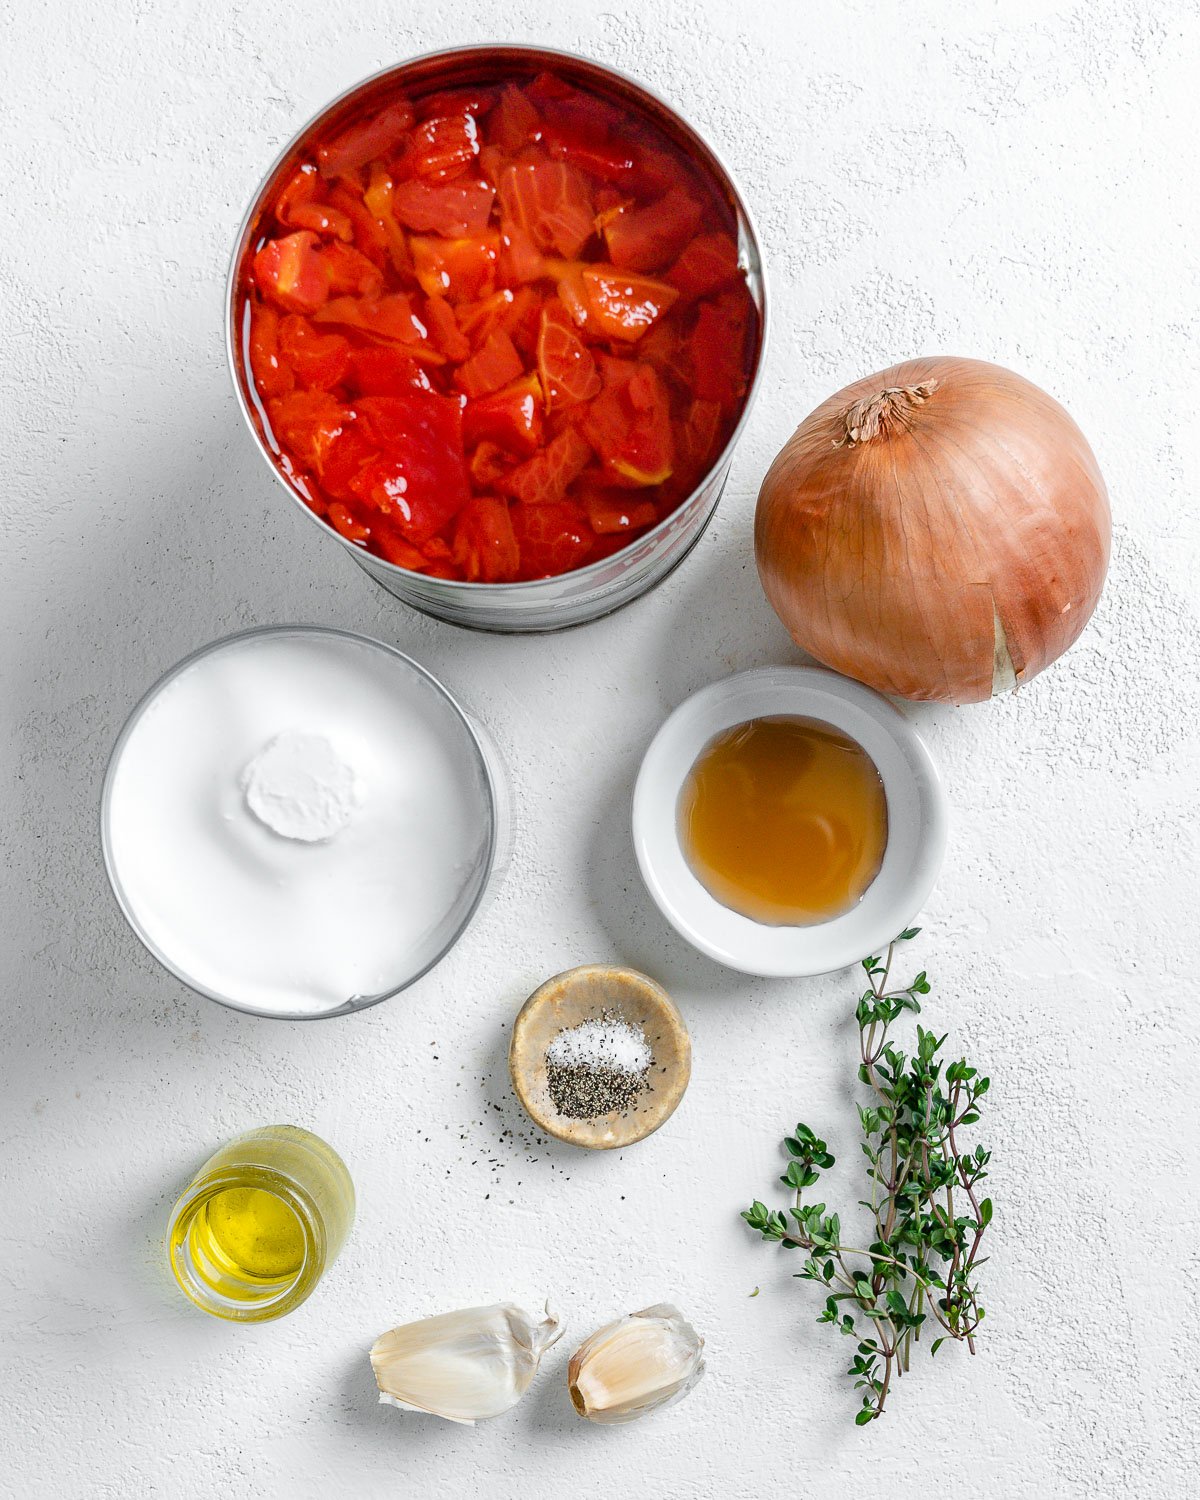 ingredients for Vegan Tomato Bisque with Thyme in individual bowls against a white surface